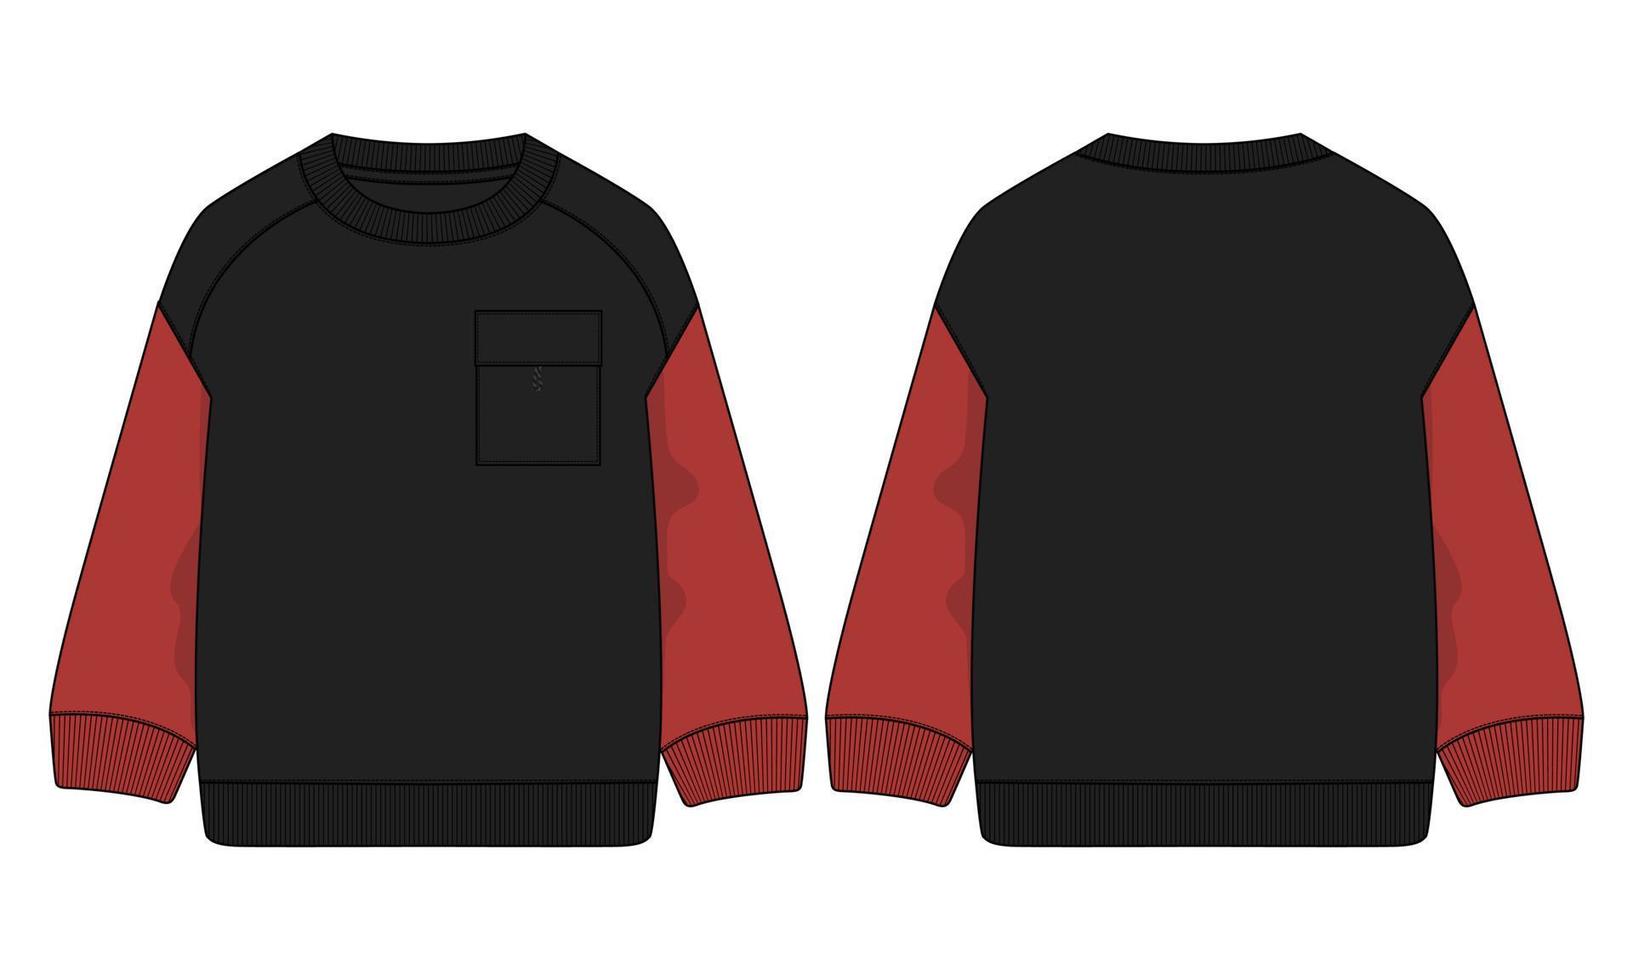 Long sleeve Sweatshirt technical fashion flat sketch vector illustration template front and back views